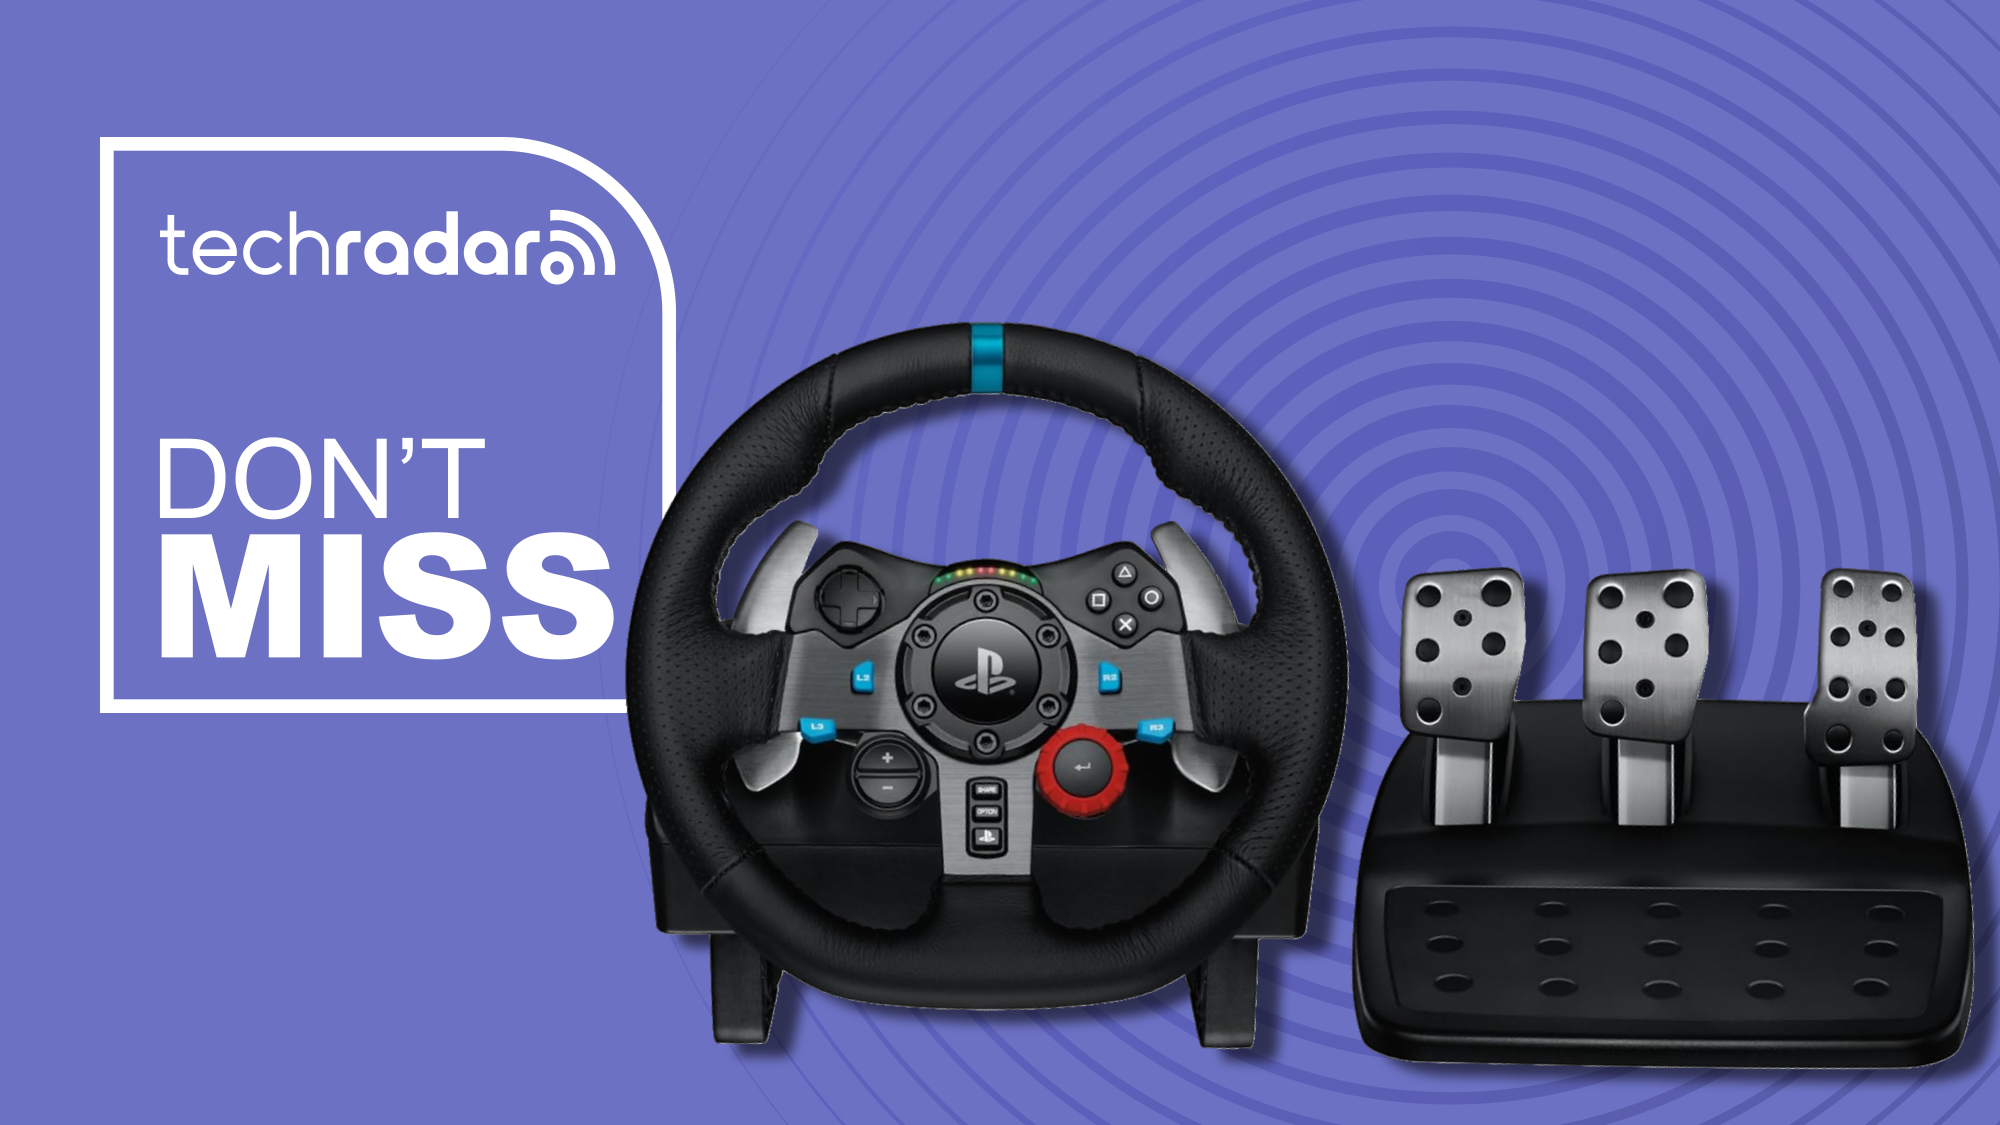 Logitech G920 review: An Xbox One/PC racing wheel that's well worth the cost